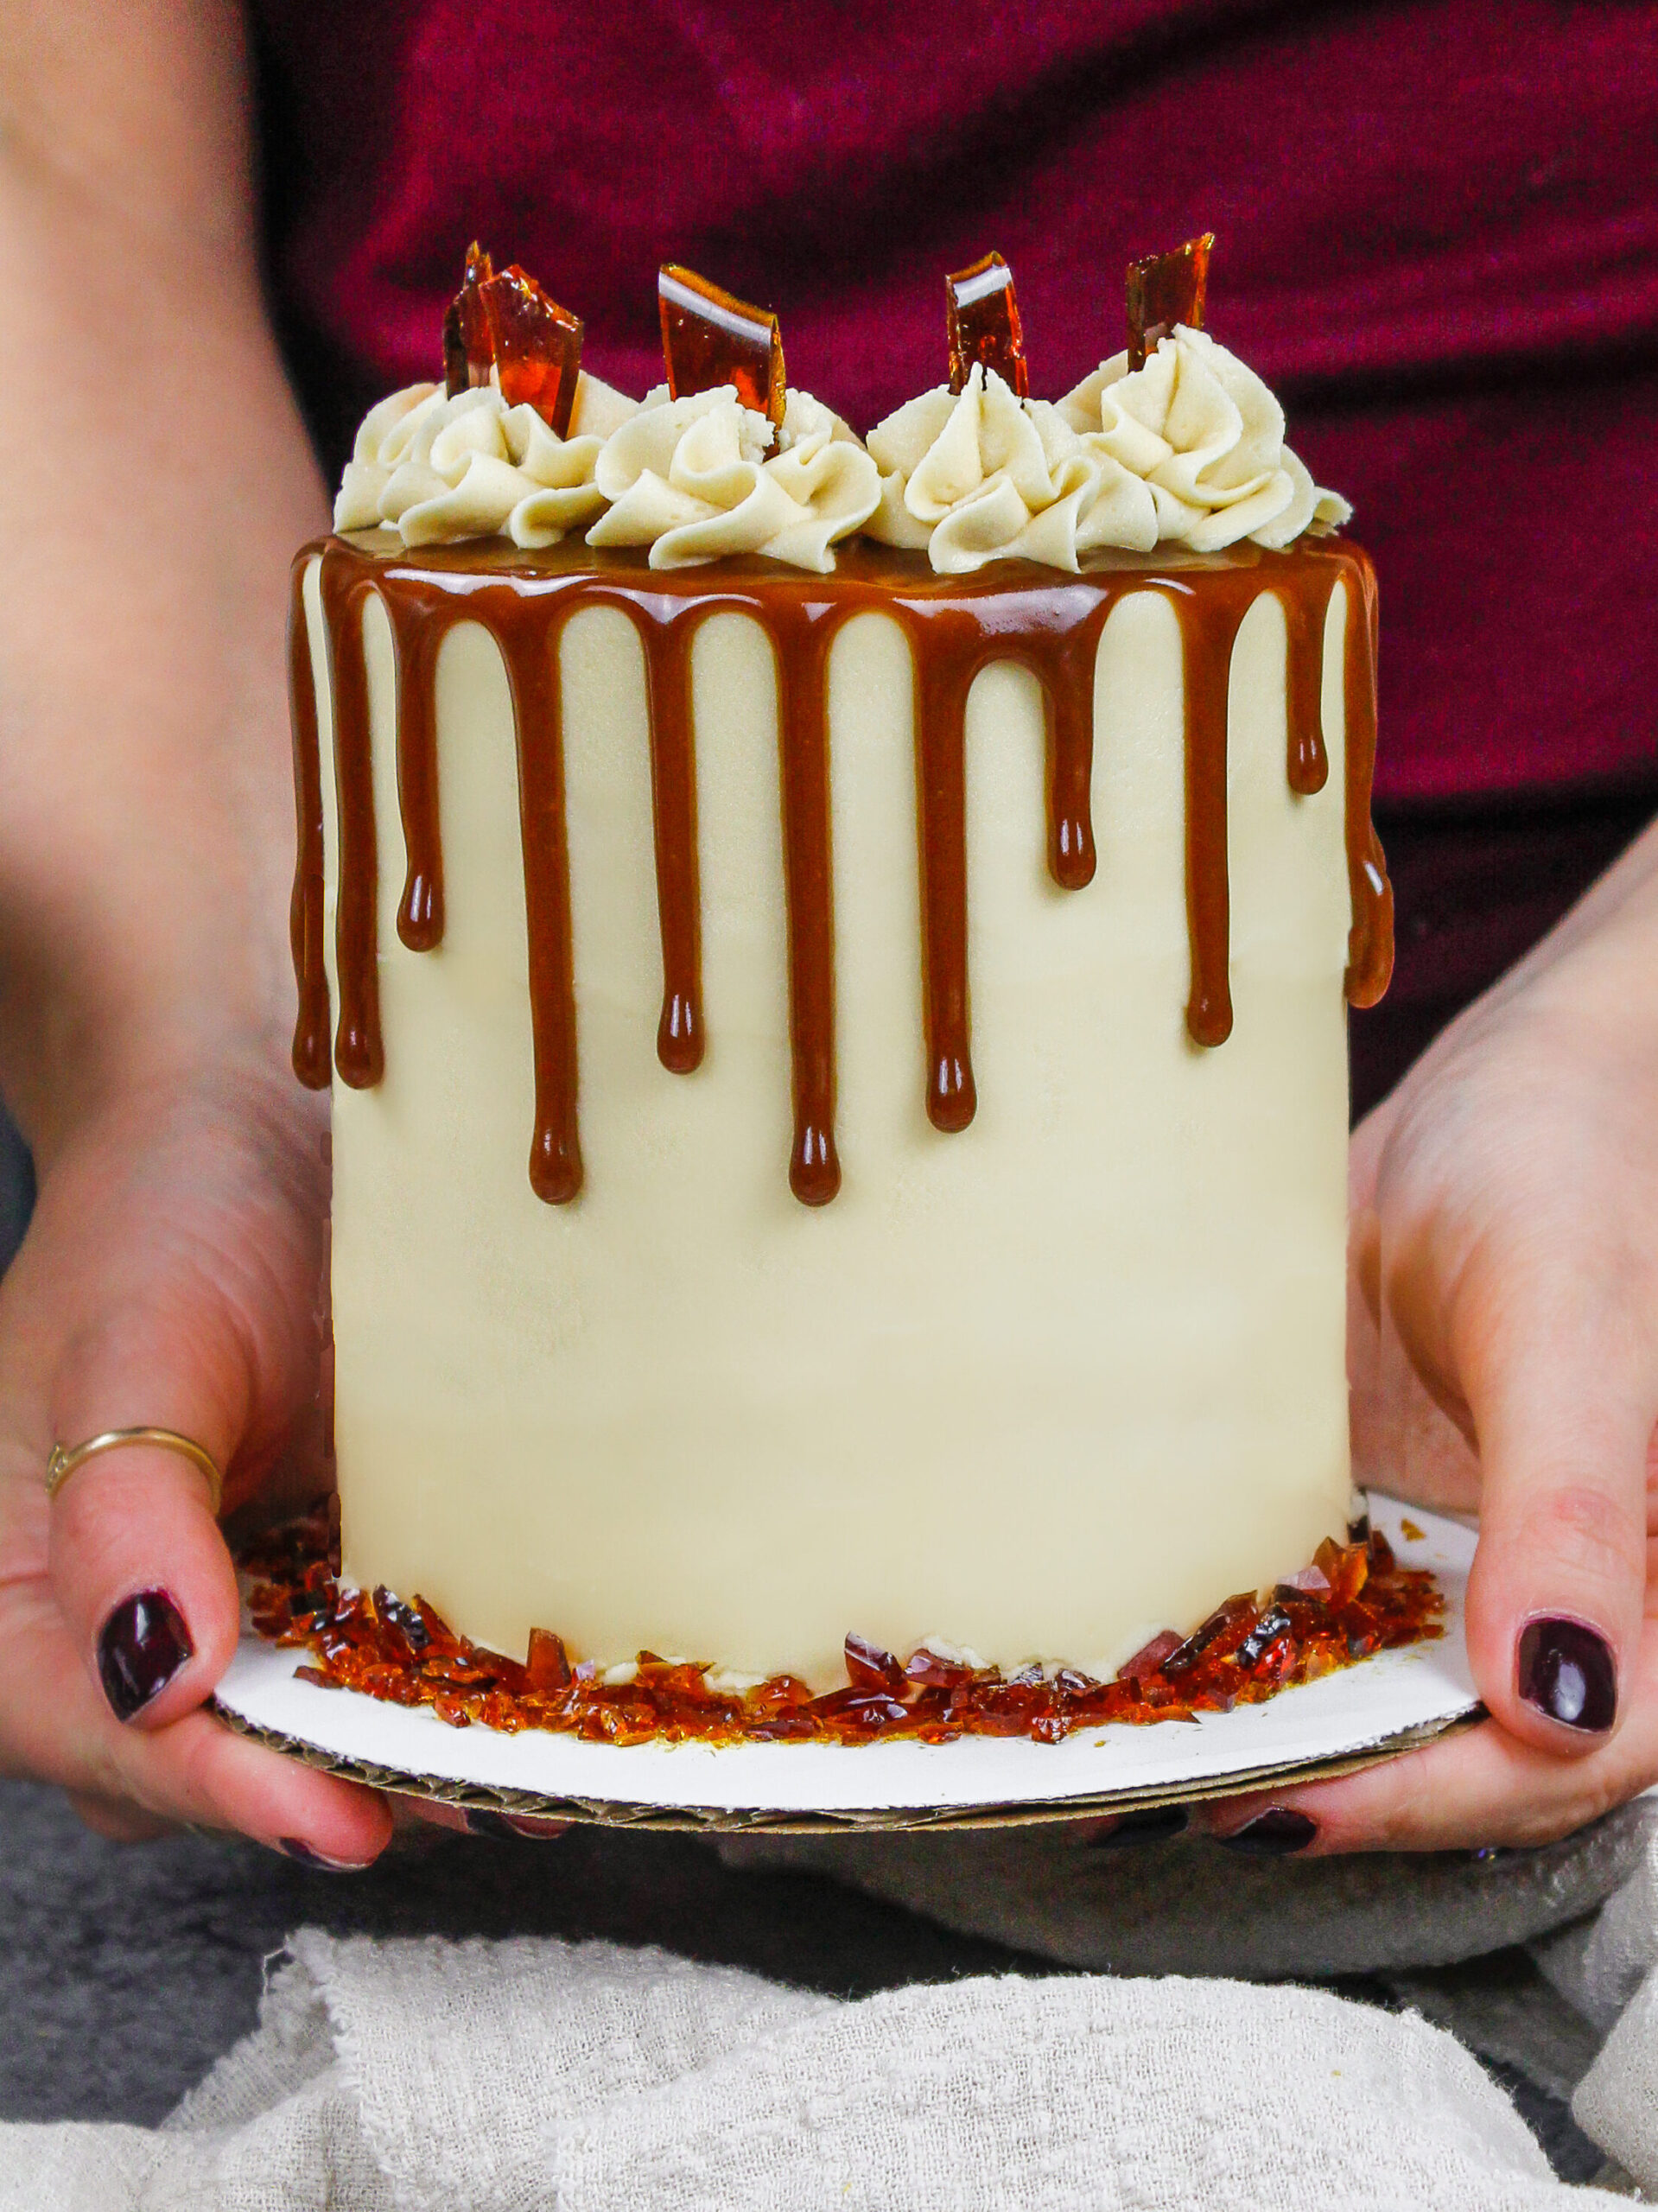 image of an adorable caramel brown sugar drip cake being held to show how small this 4-inch cake is